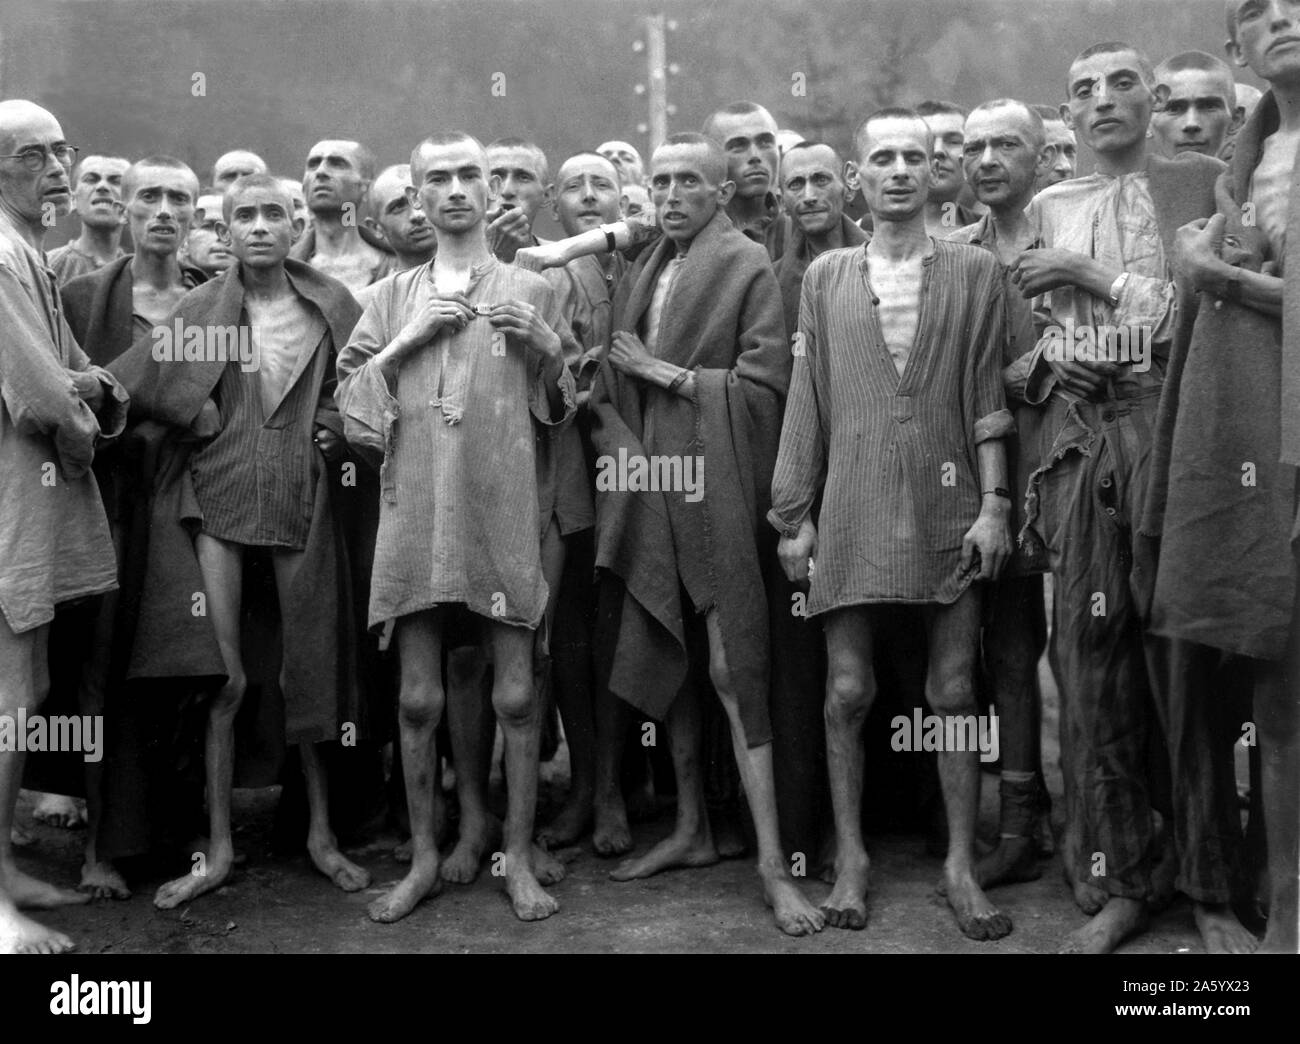 Photograph of Ebensee concentration camp prisoners. Established by the SS to build tunnels for armaments storage near the town of Ebensee, Austria in 1943. It was part of the Mauthausen network. Dated 1945 Stock Photo